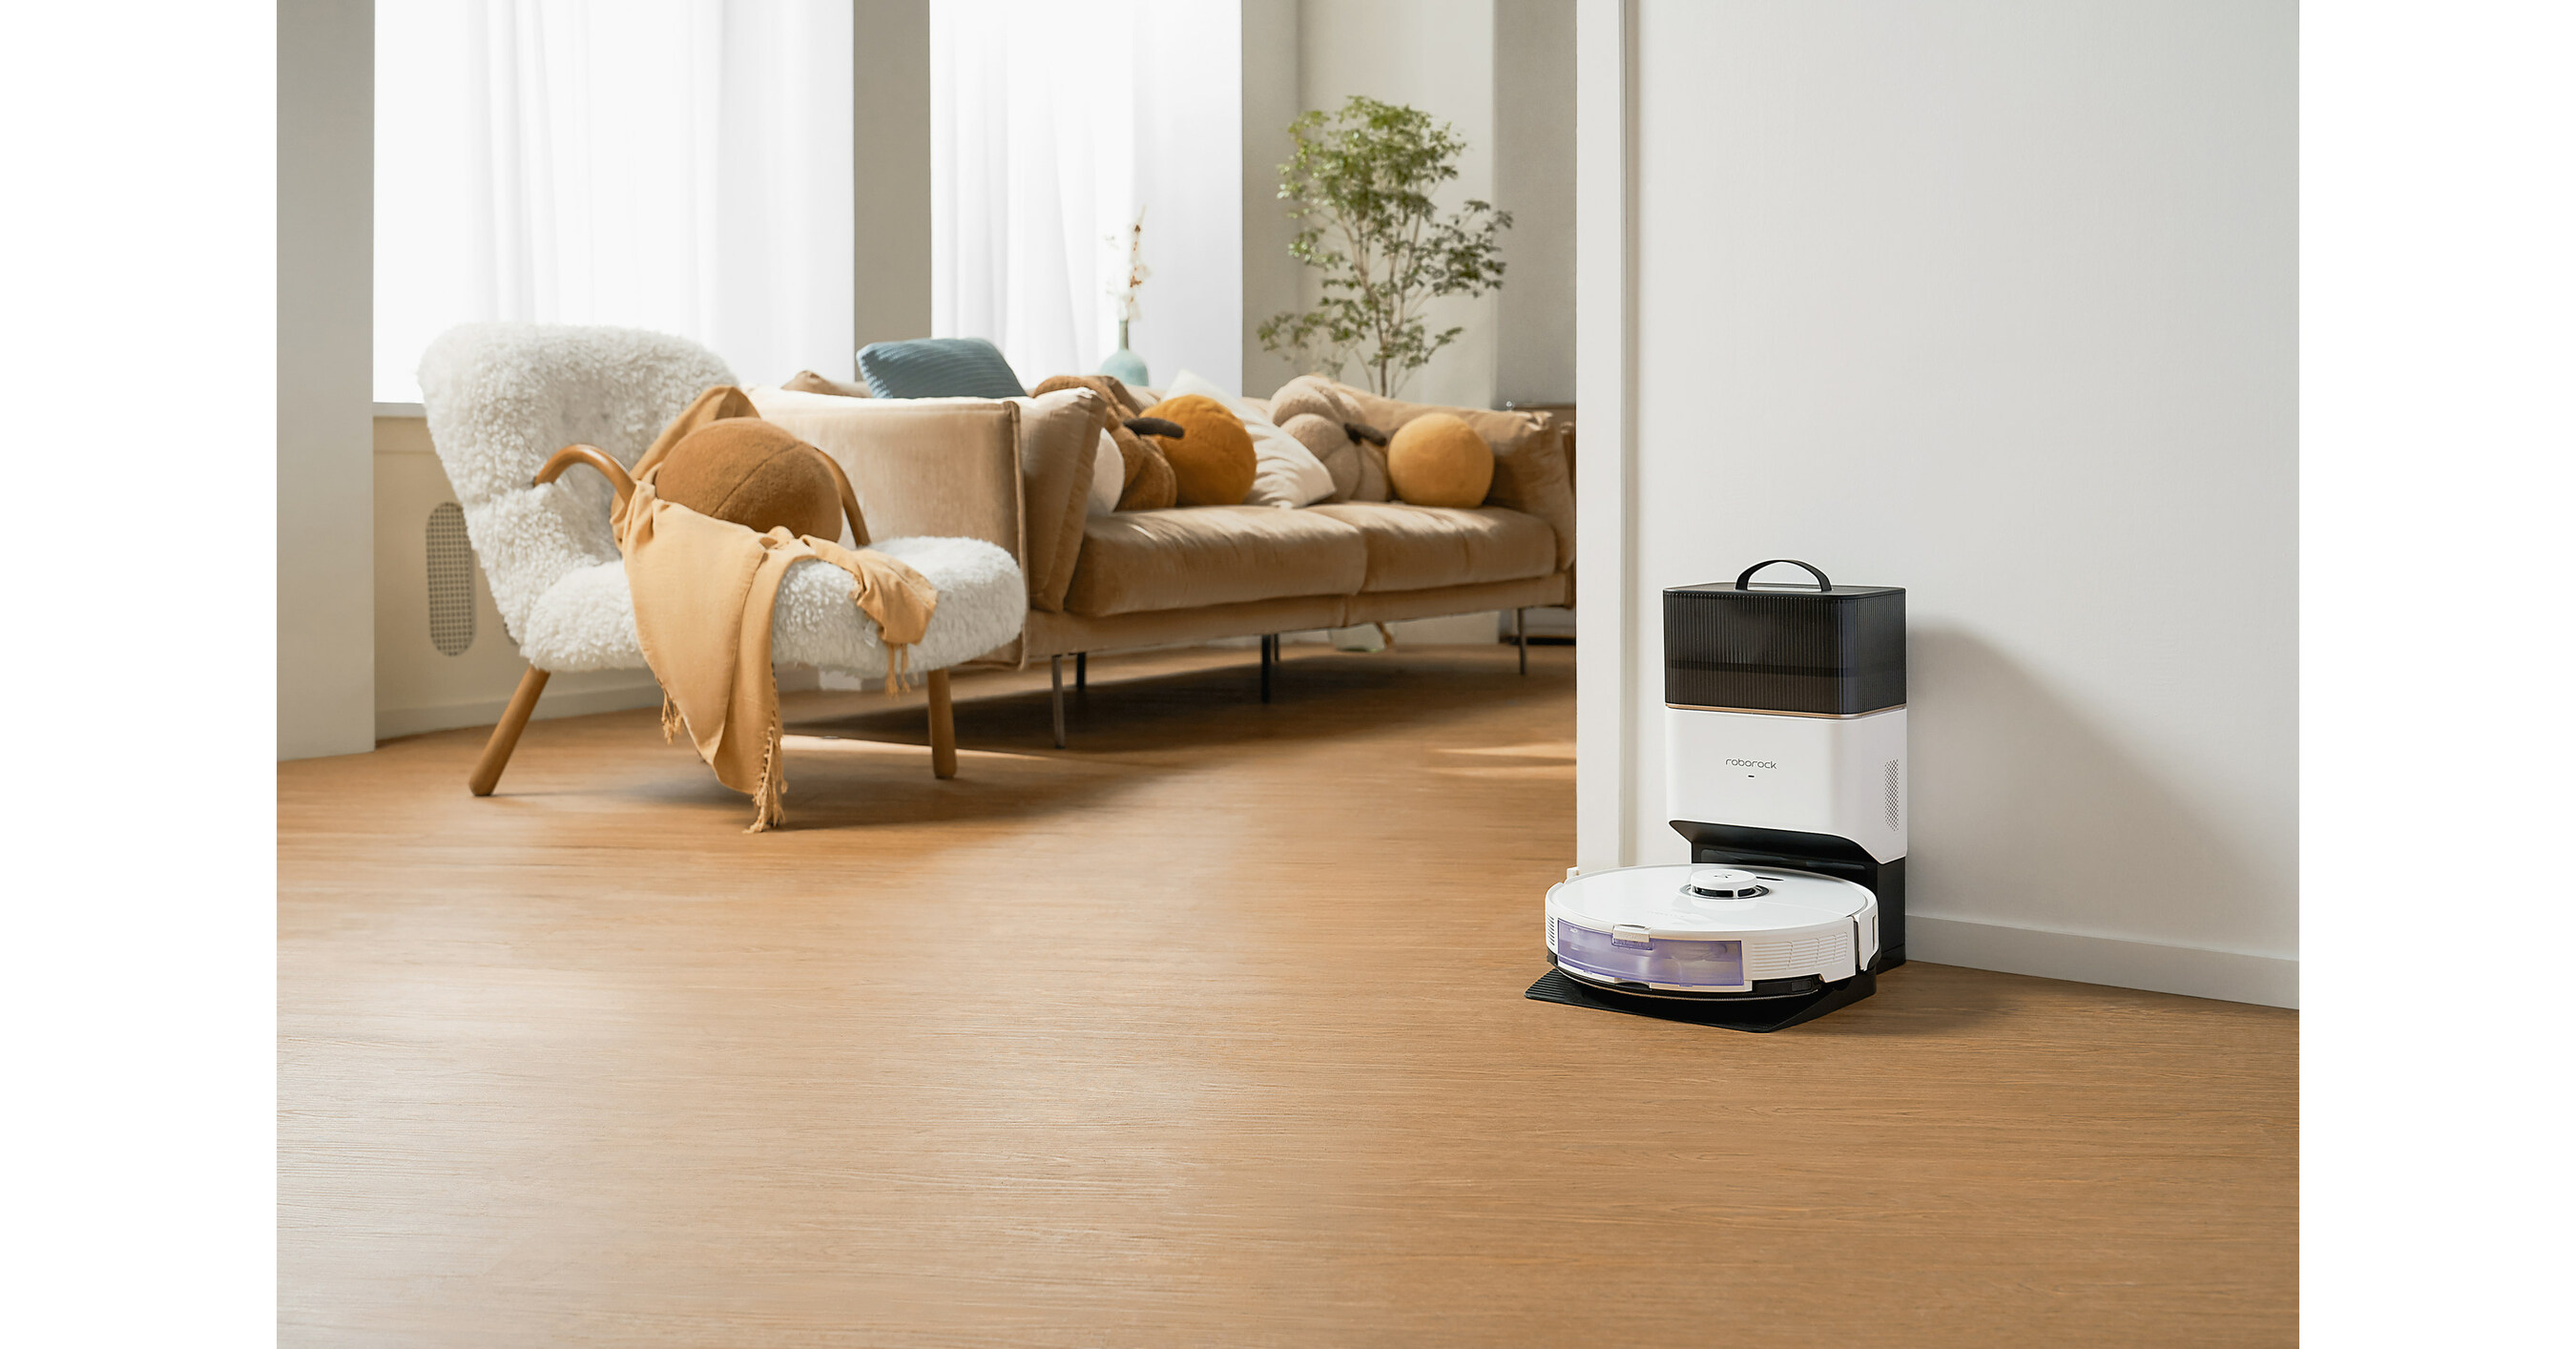 Roborock Debuts All-New Cleaning Systems, Including Roborock S8